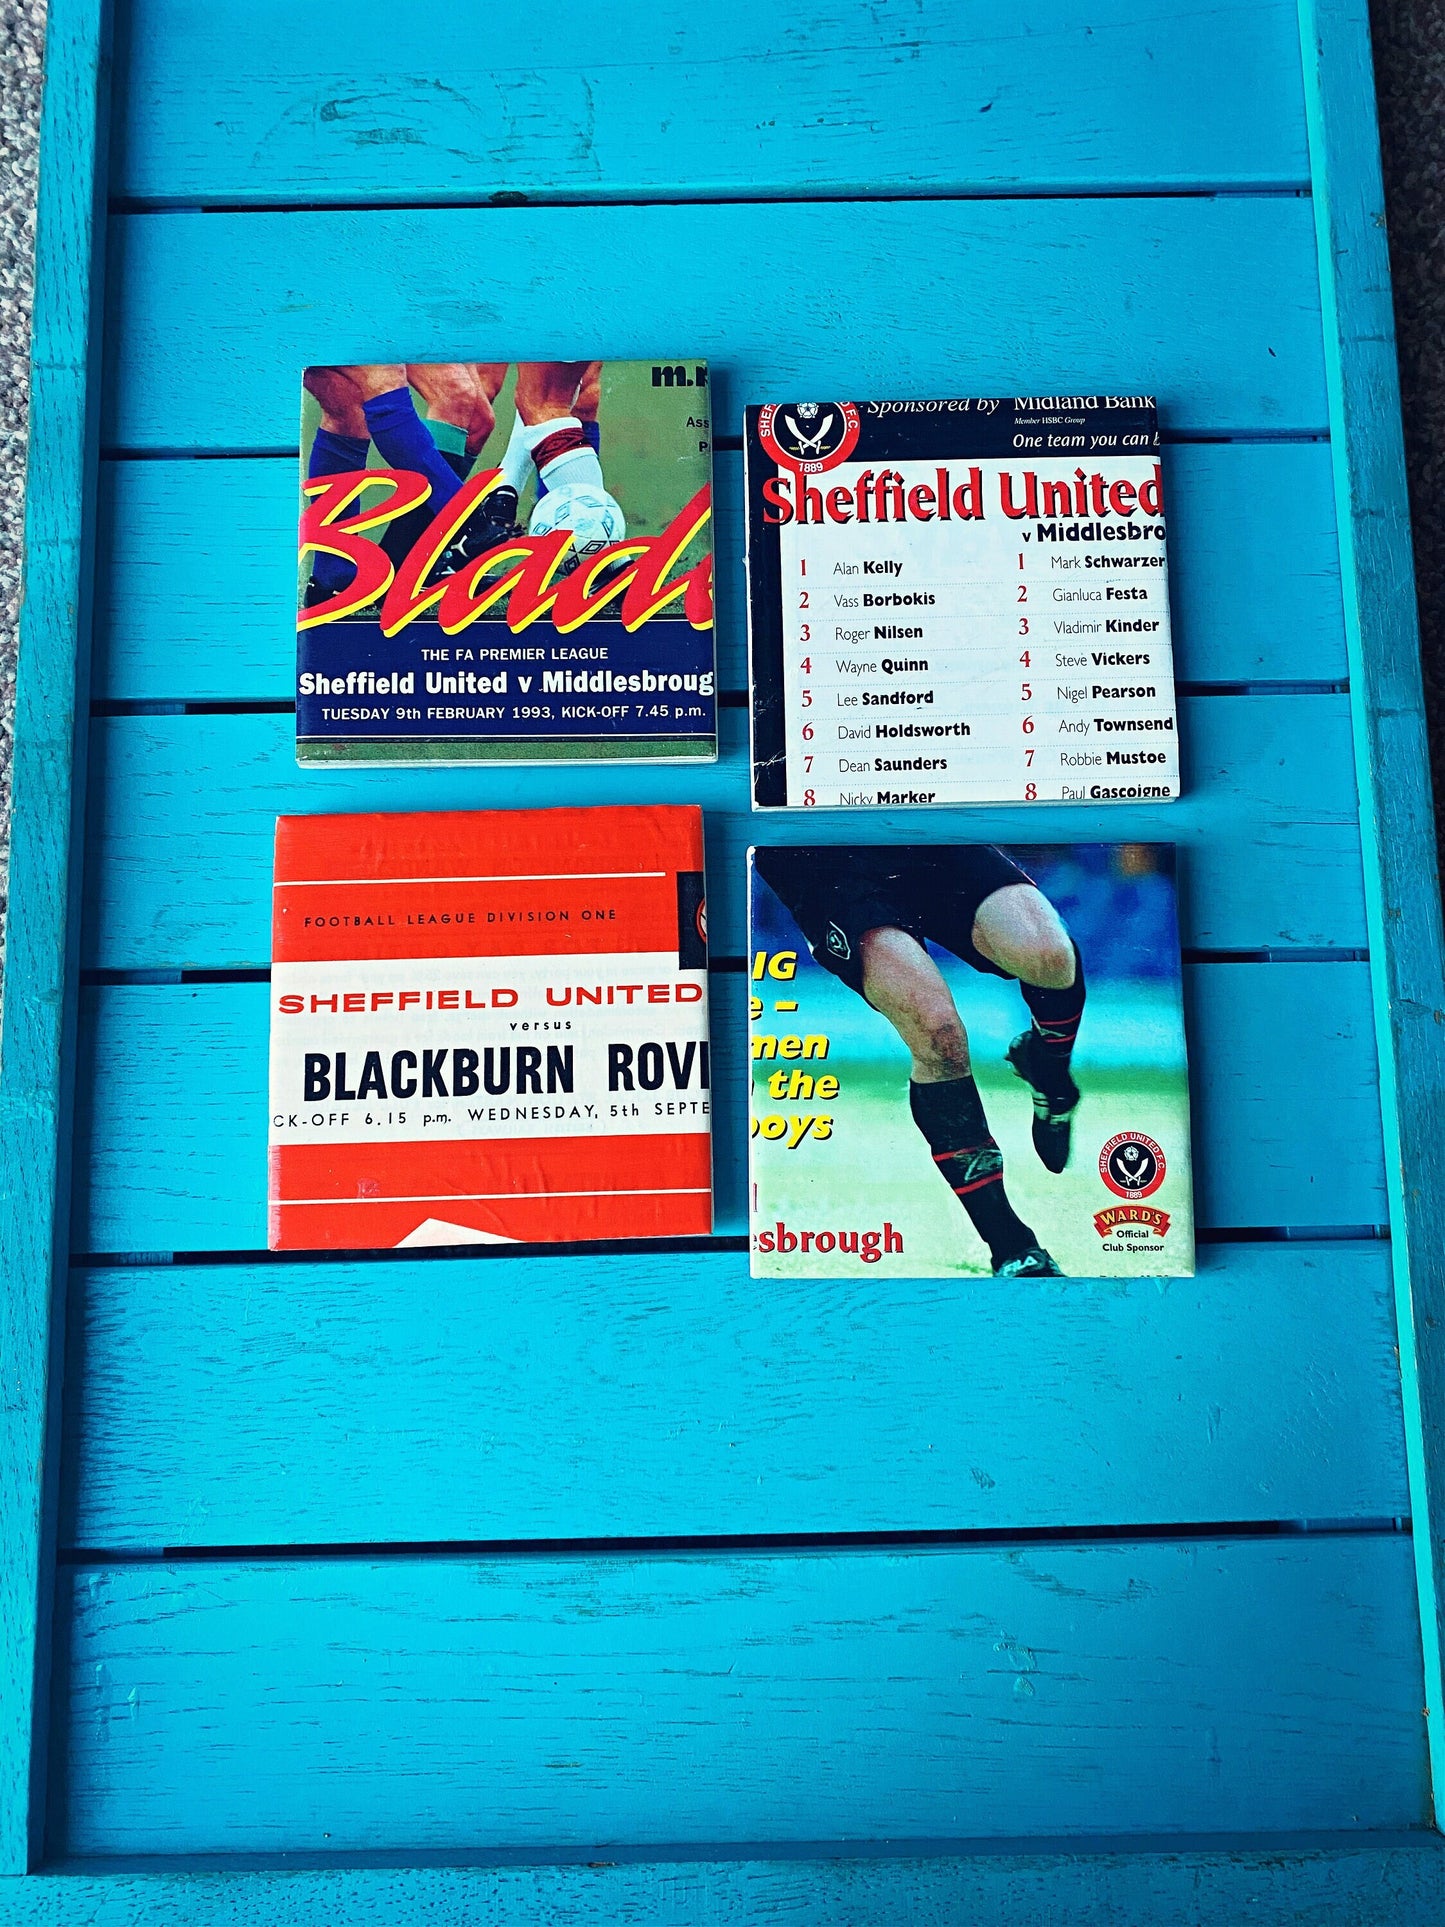 Vintage Sheffield United Football Programme Coasters. Upcycled Football Gift. Man Cave Home Decor. Retro Football Gift for Dad.